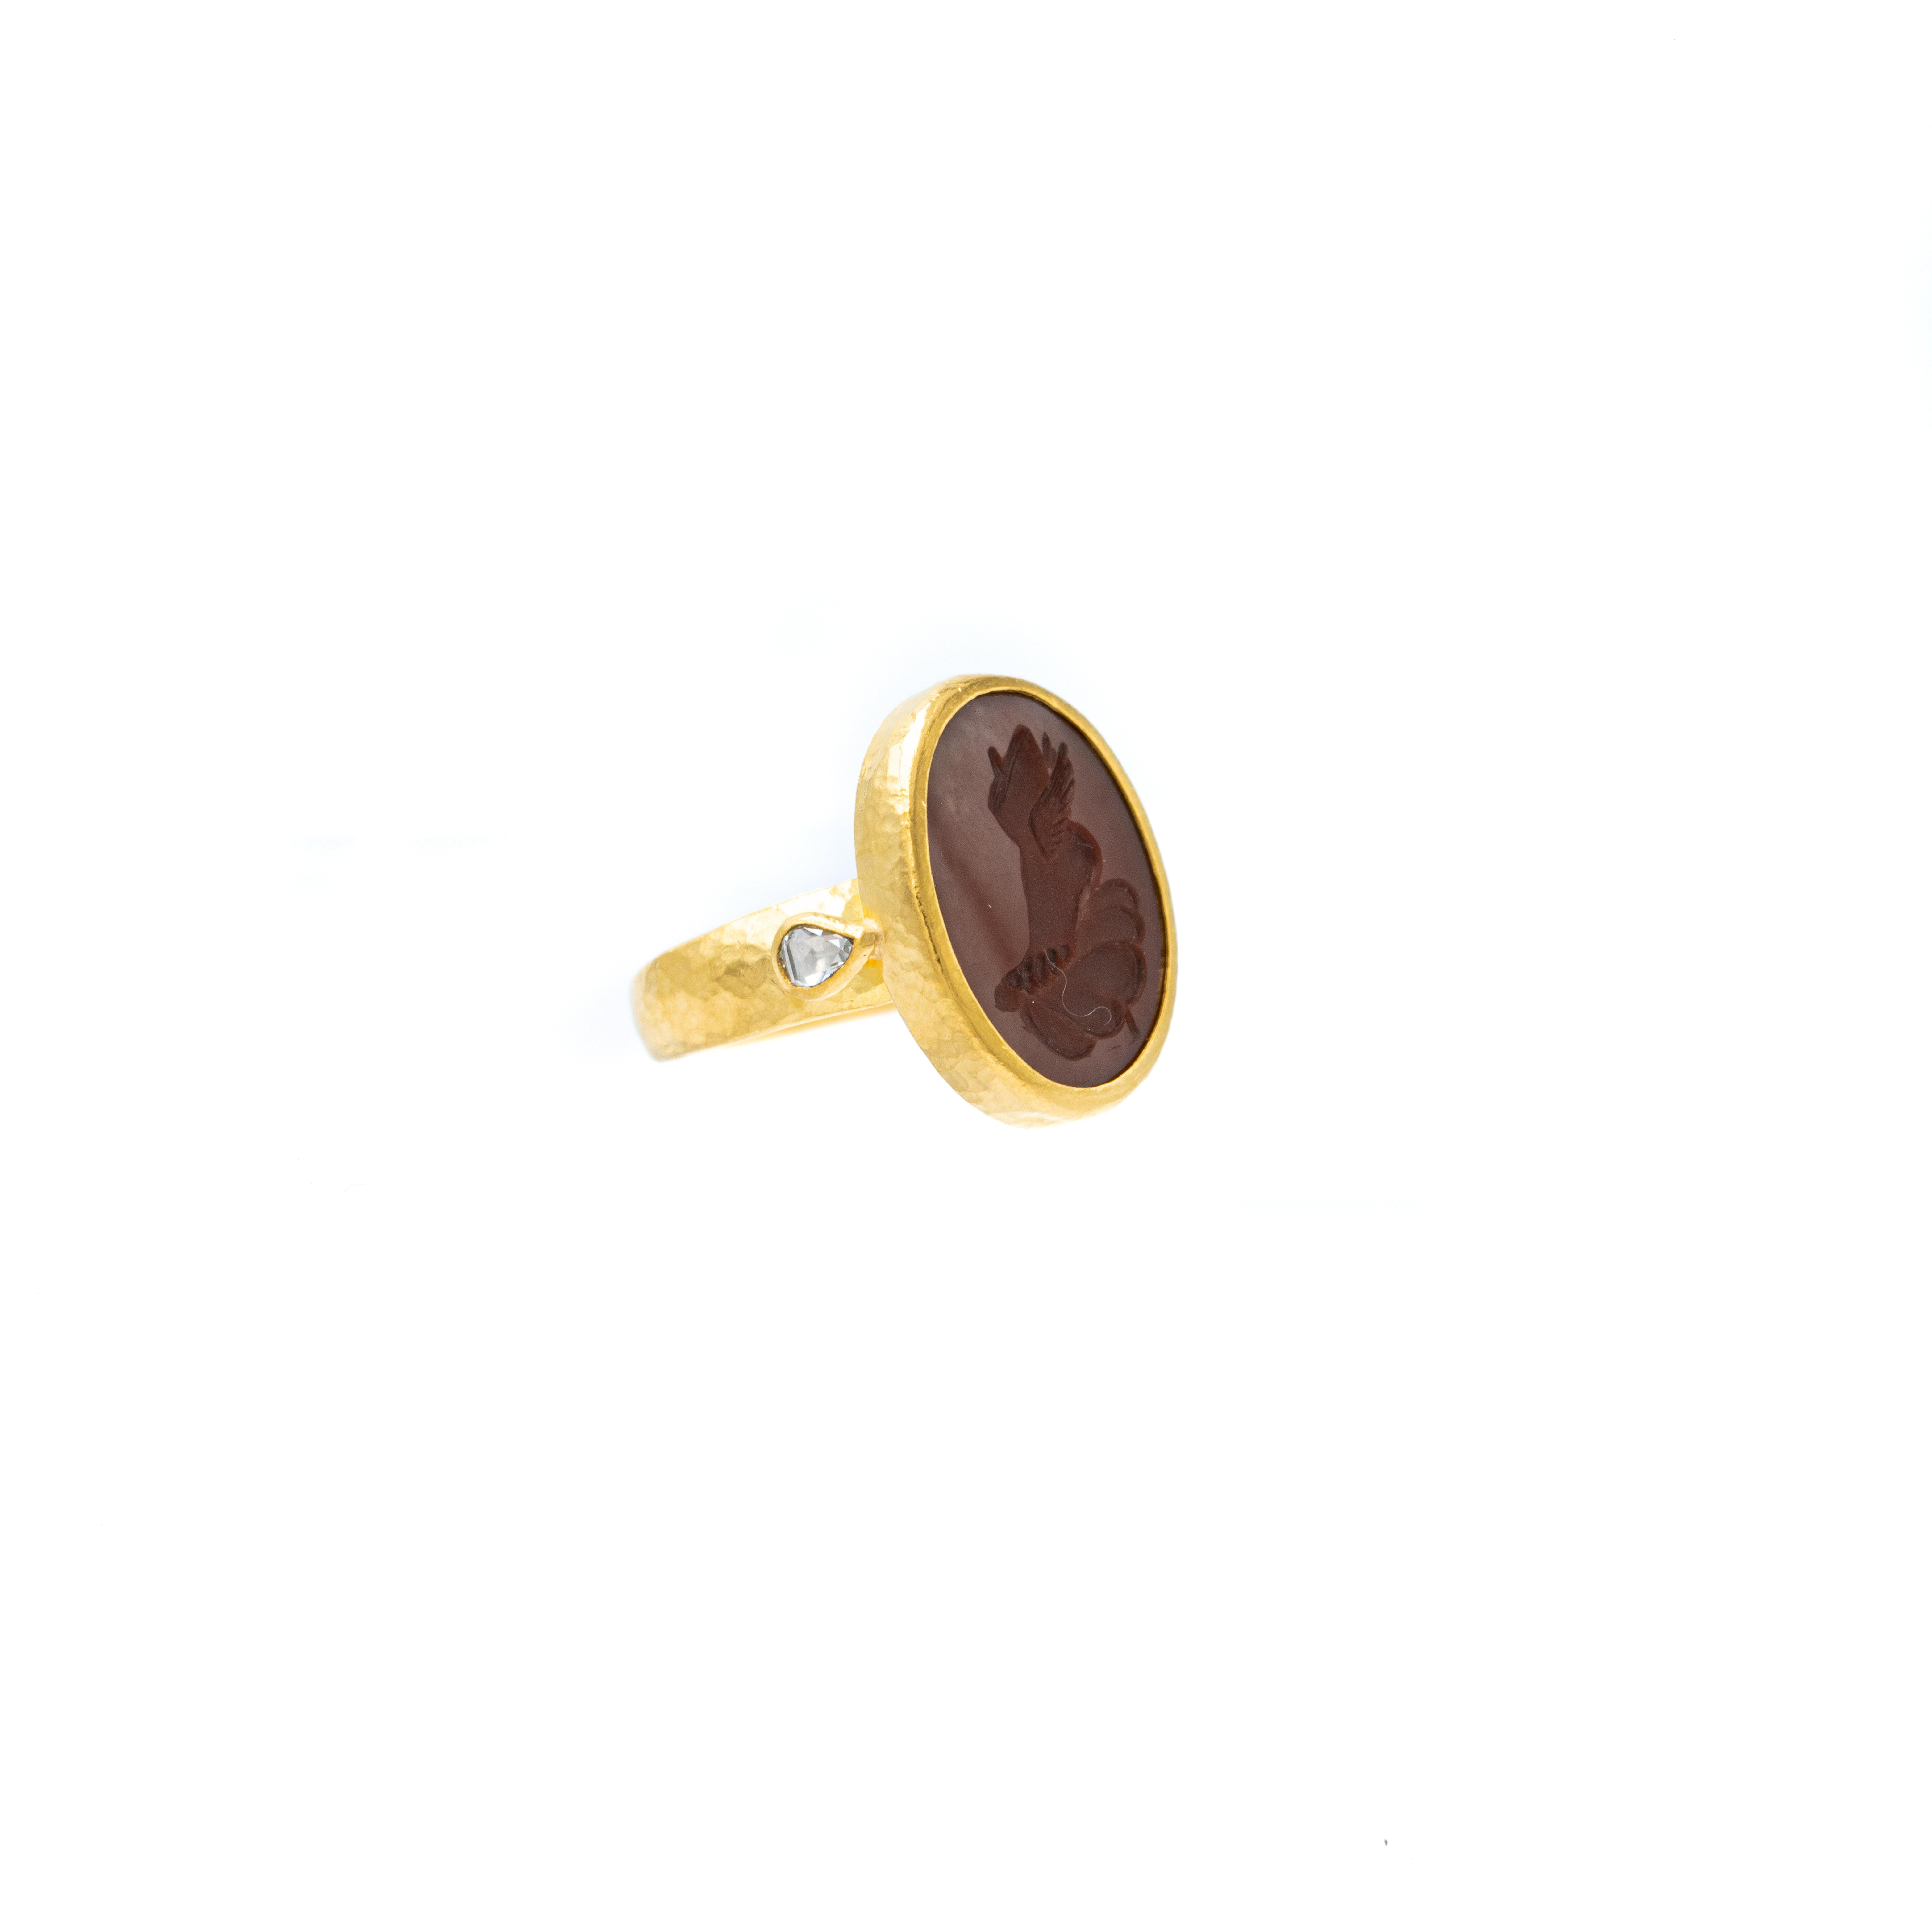 From Gurhan’s remarkable collection of handmade 24k gold treasures, inspired by the sensuality of pure gold, each jewel illuminates the golden warmth of the feminine spirit.

This ring features a unique design with one of a kind brown oval carved